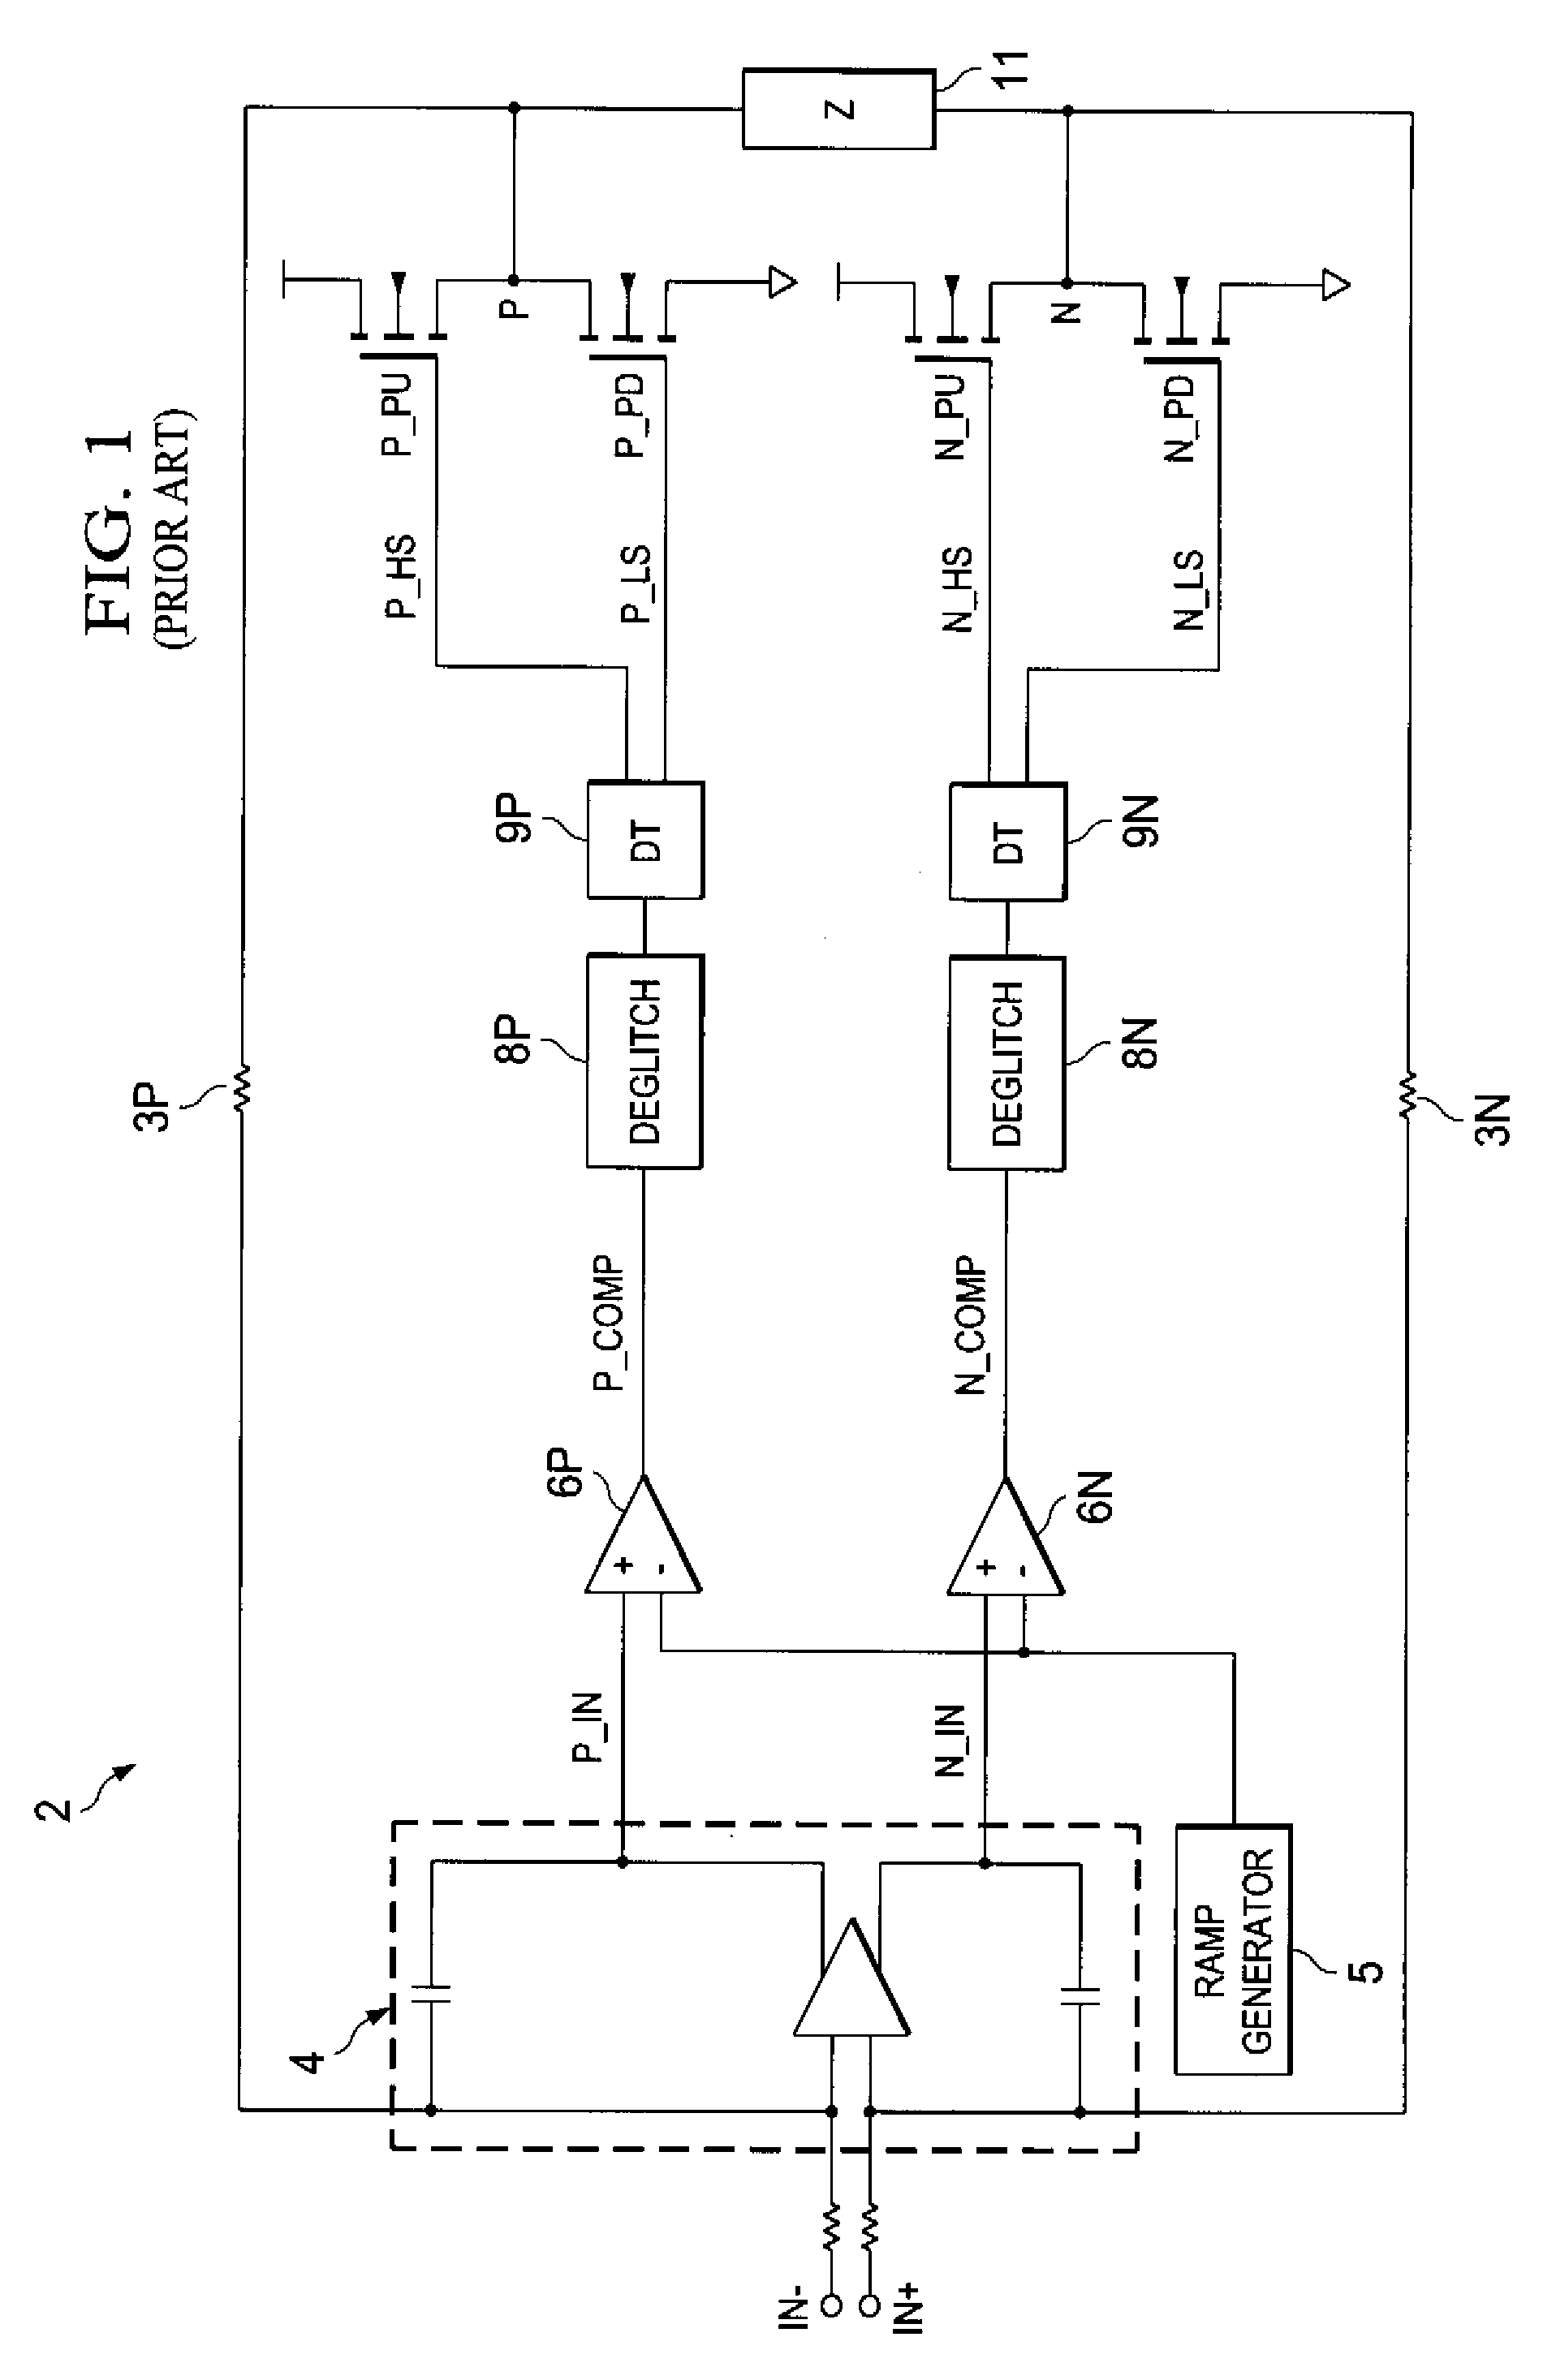 Reduction of dead-time distortion in class d amplifiers